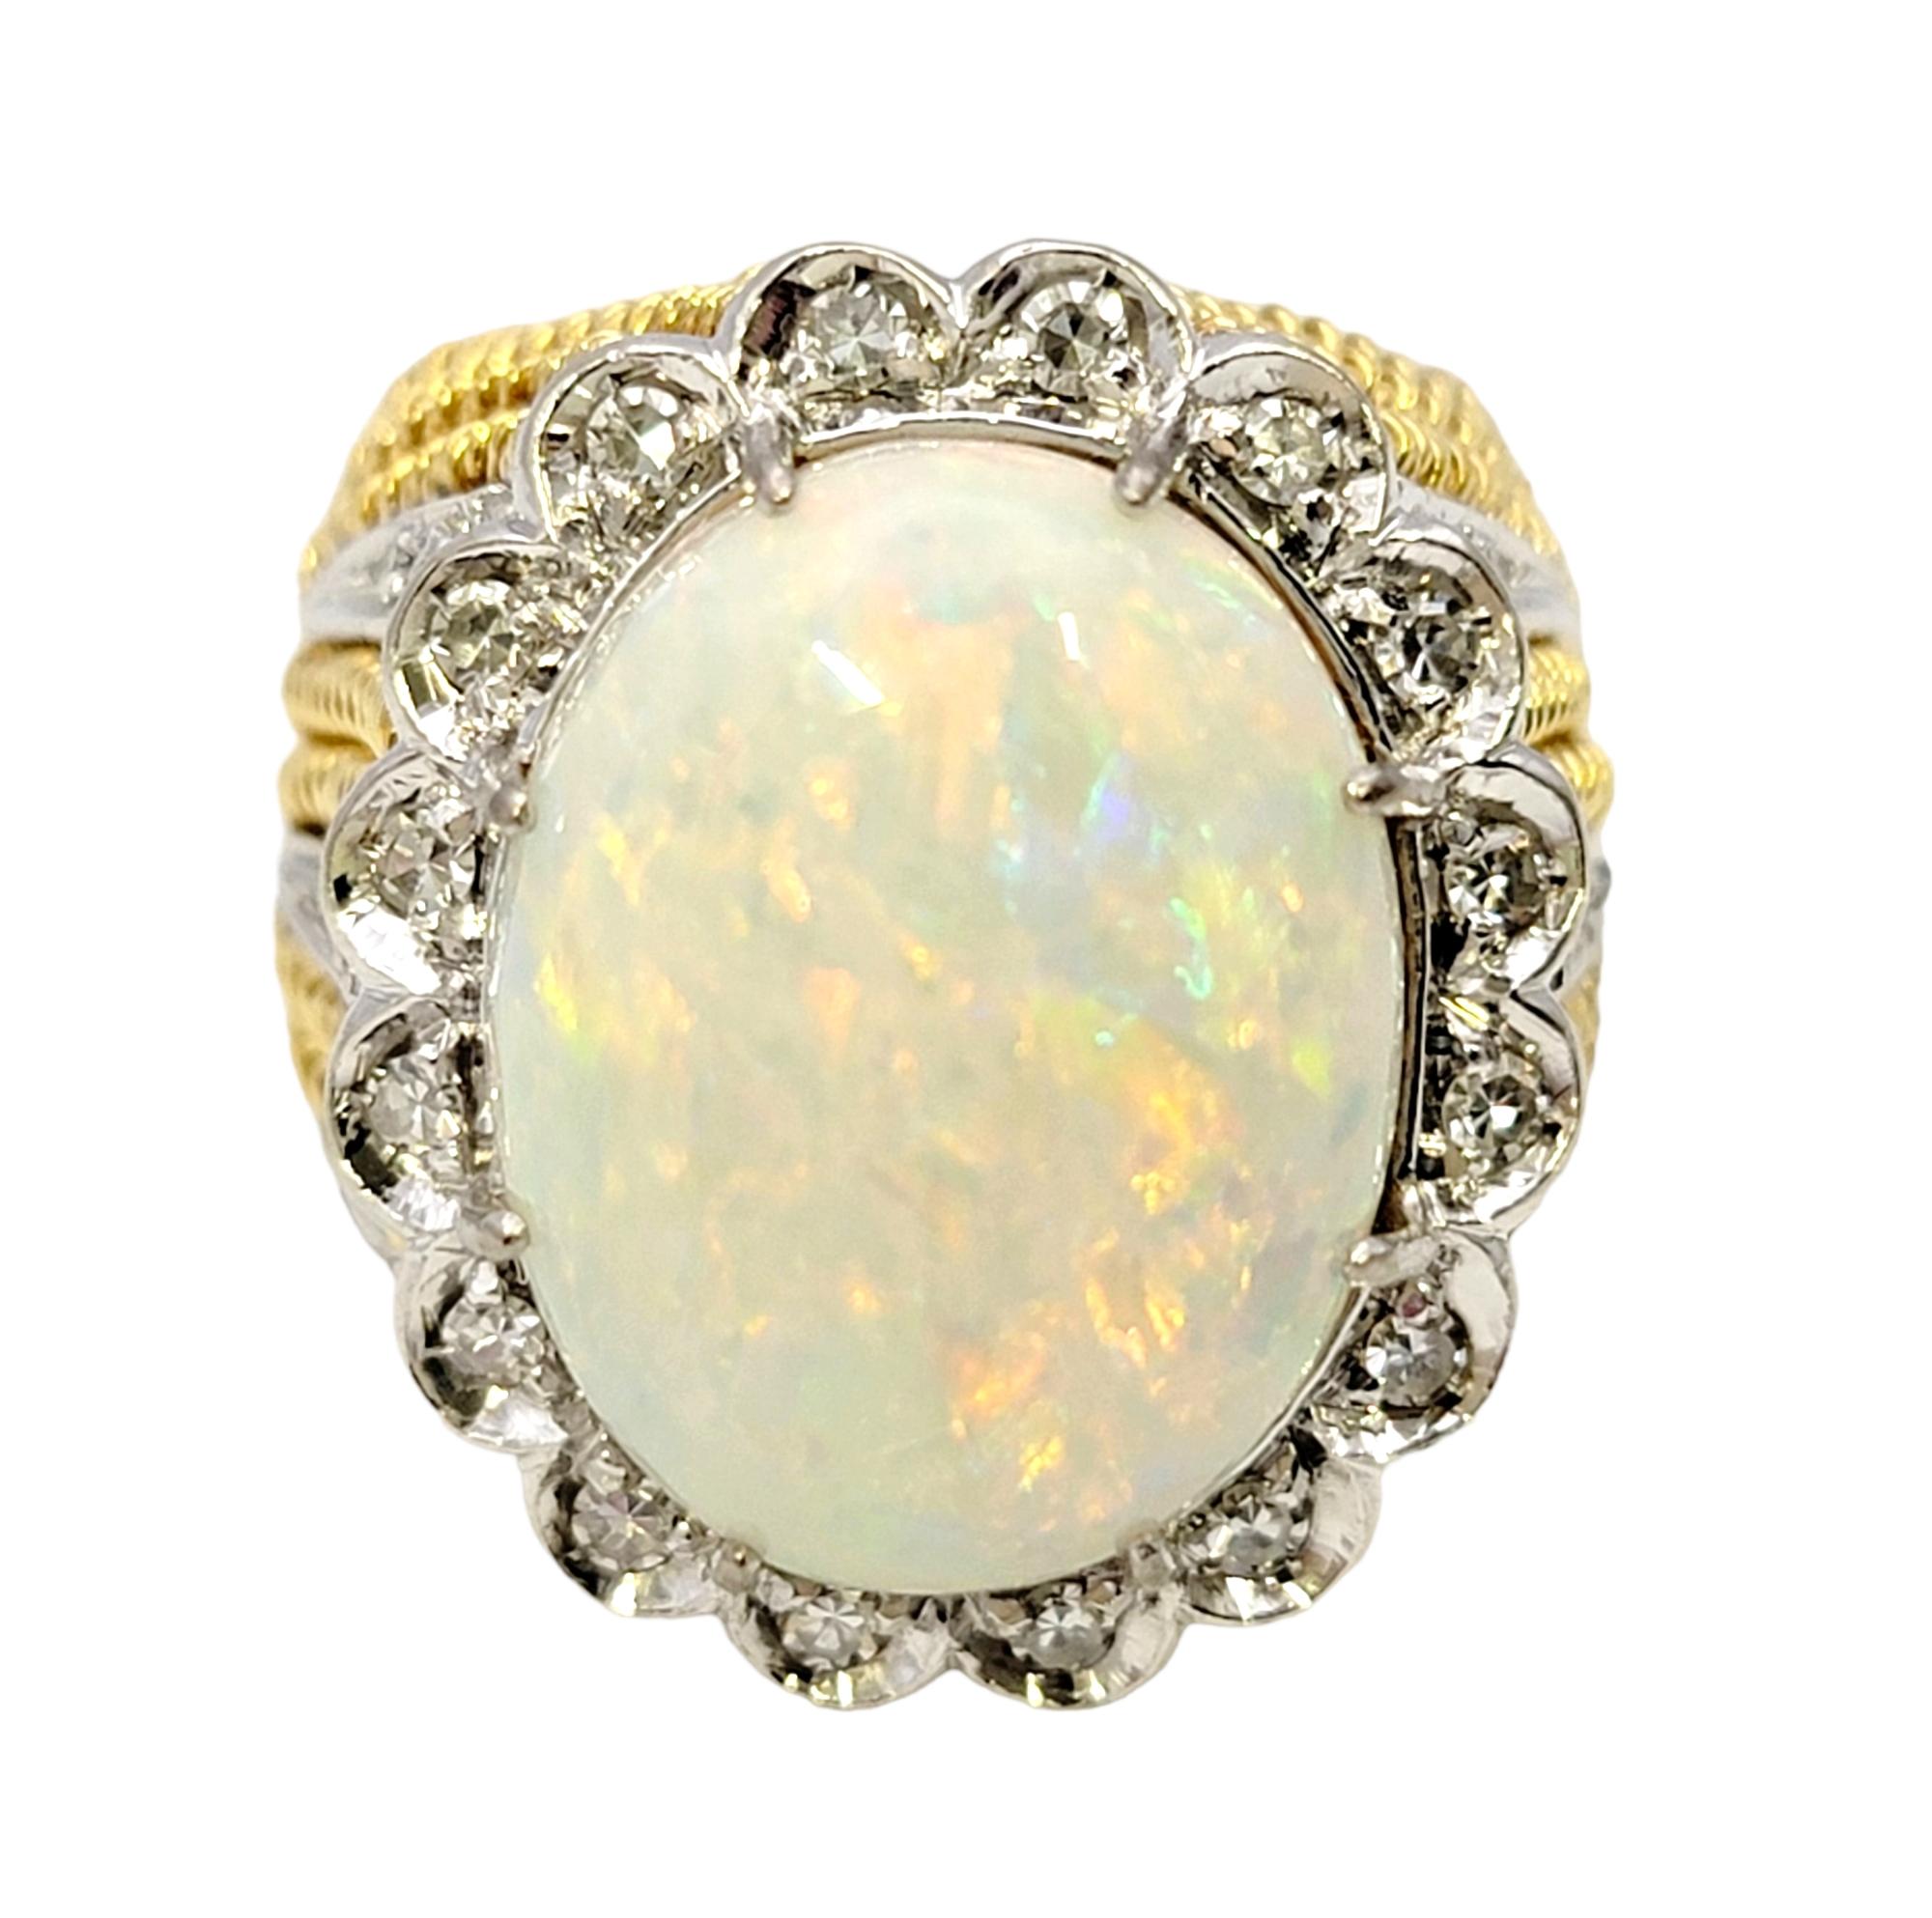 Contemporary Huge Cabochon Opal Cocktail Ring with Diamond Halo in 18 Karat Yellow Gold For Sale